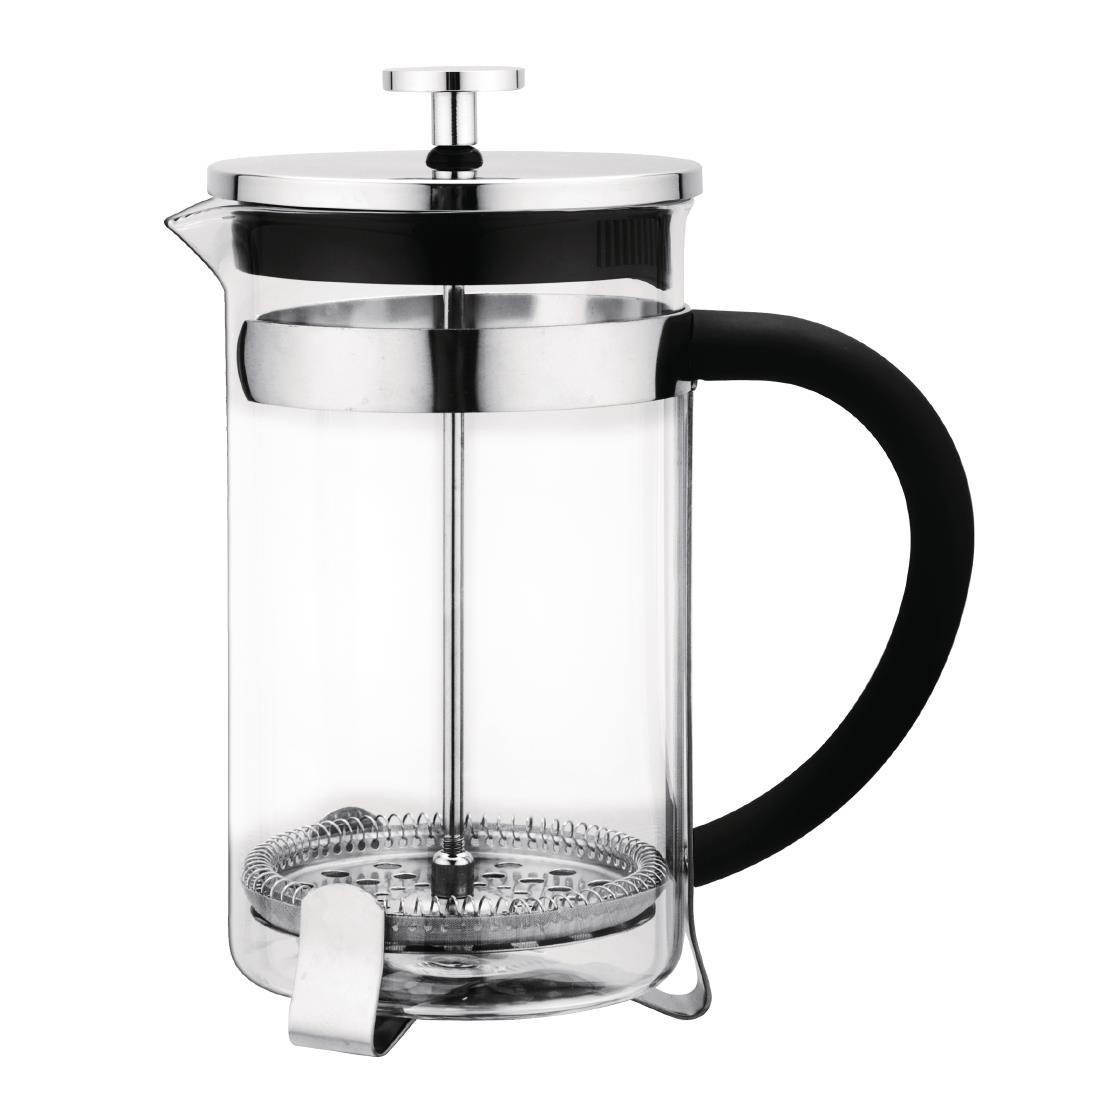 Olympia Contemporary Glass Cafetiere 6 Cup - GF231  - 1